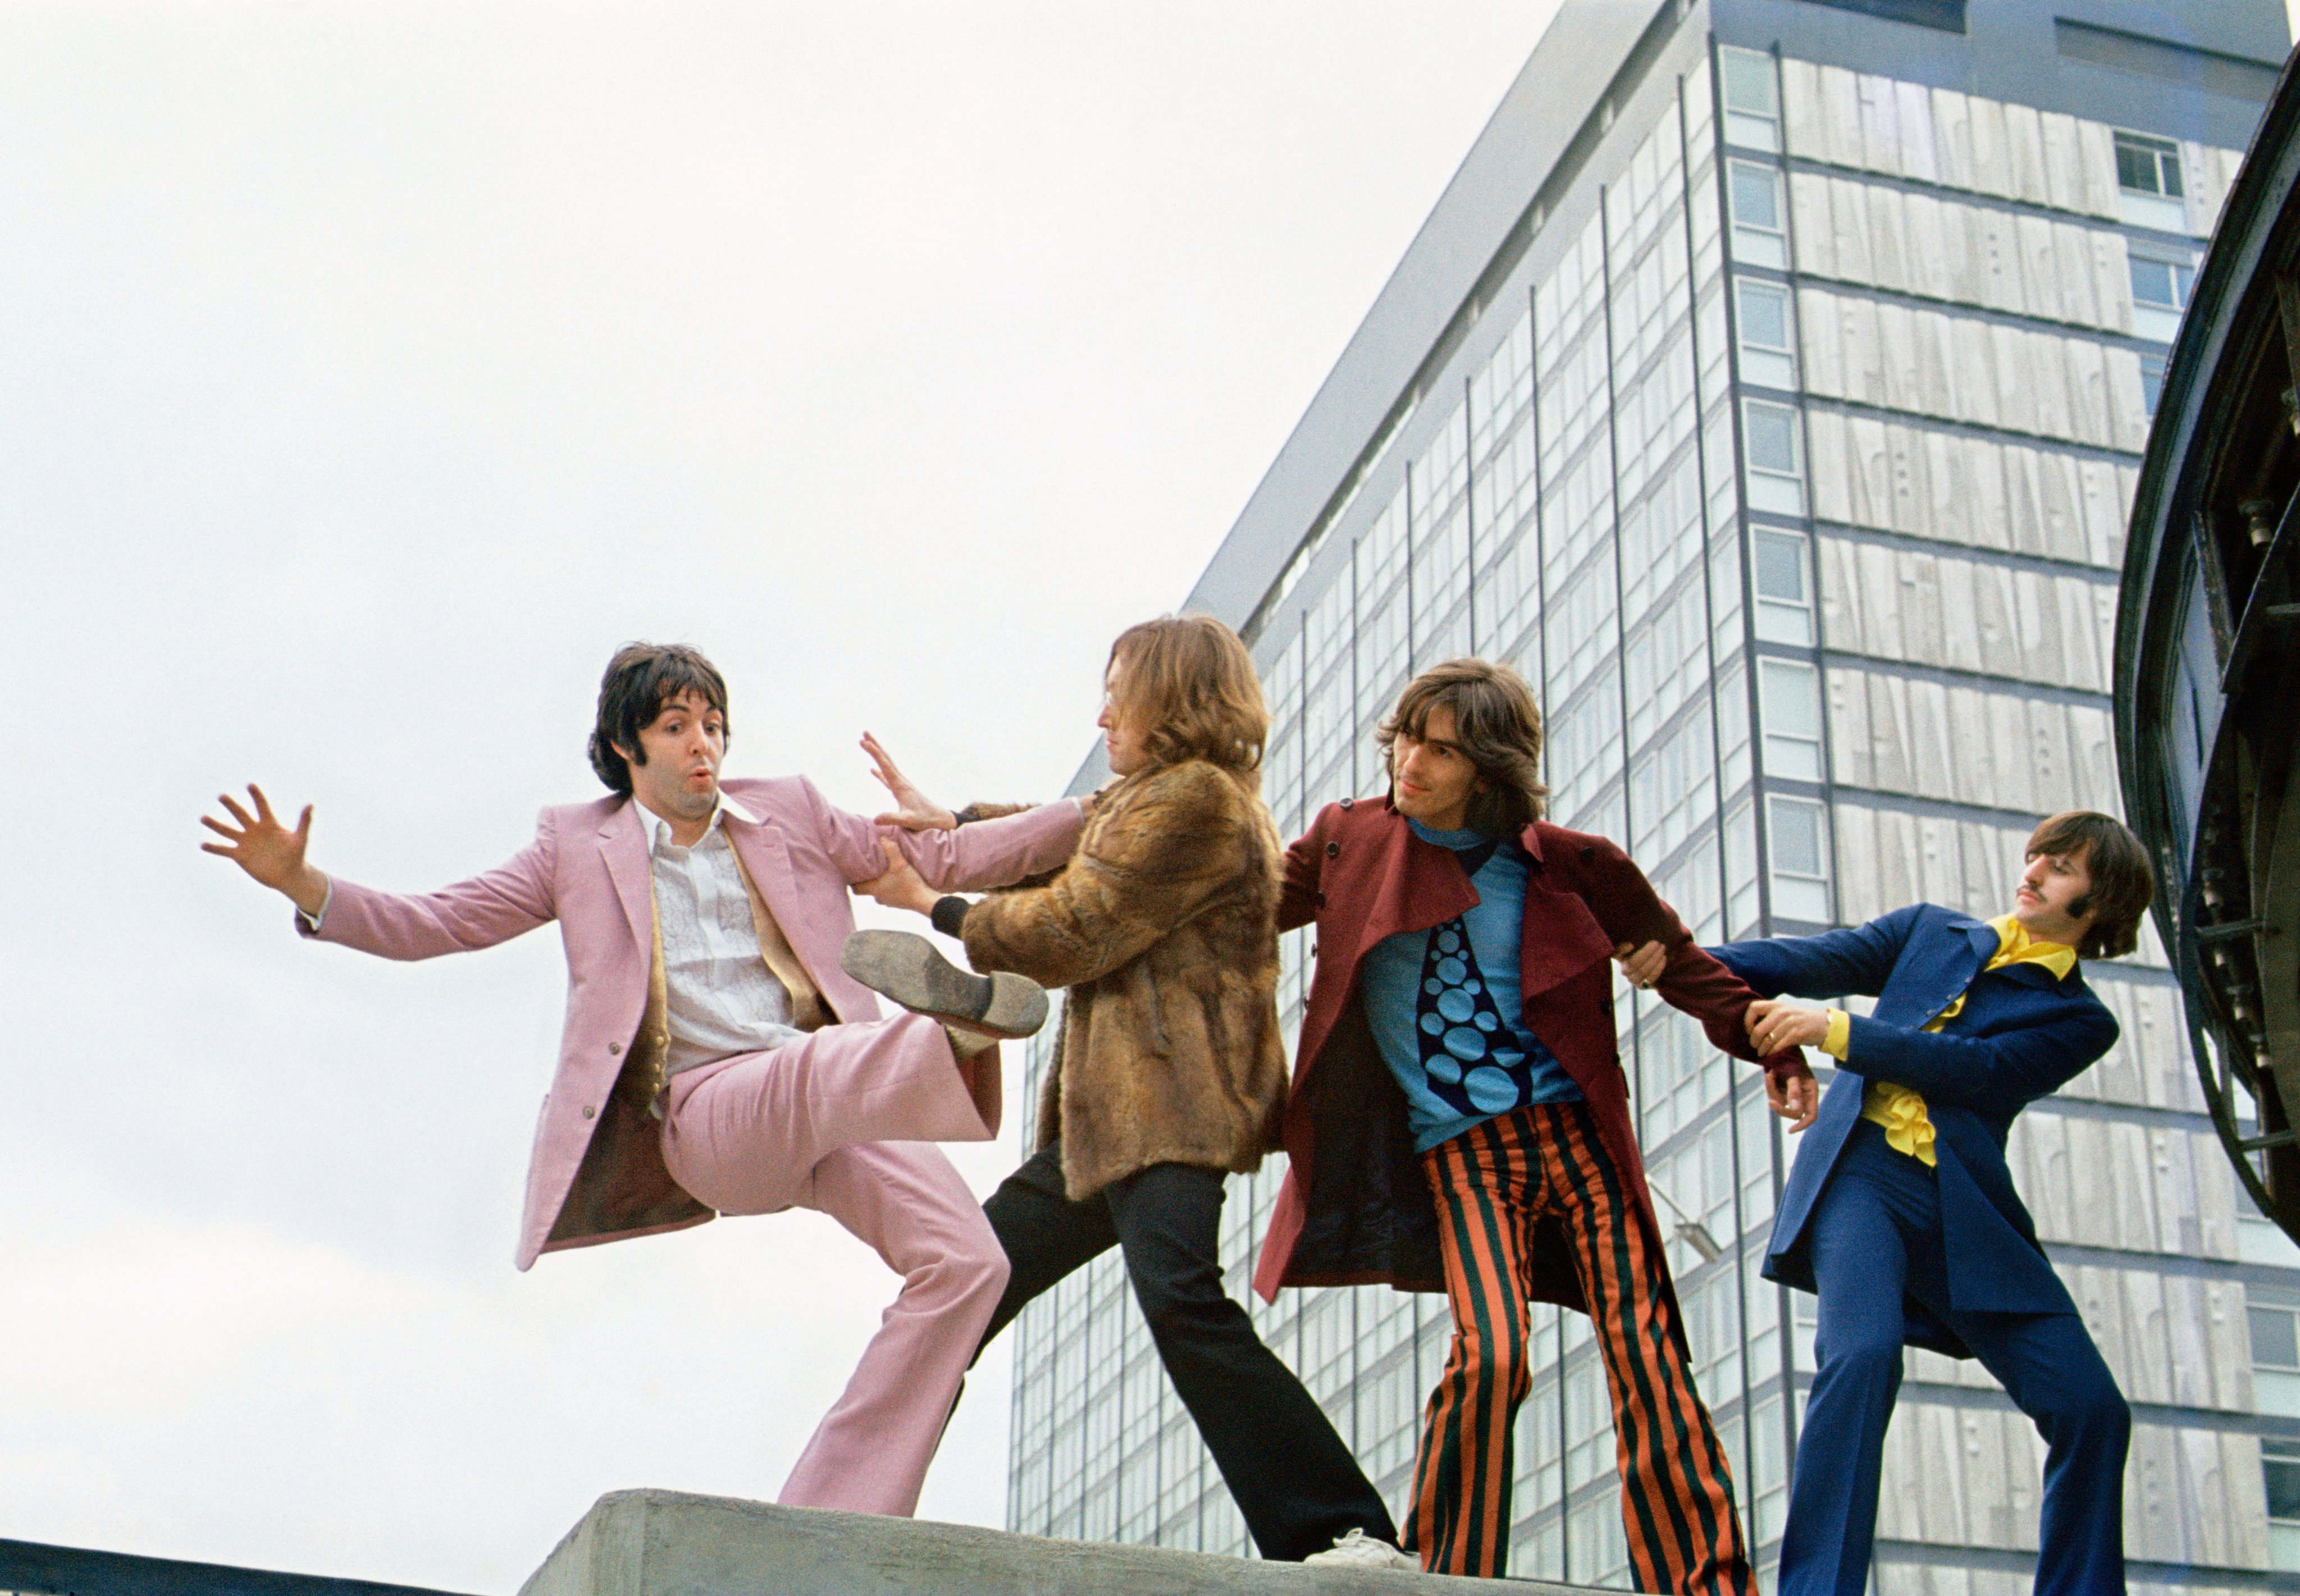 The Beatles in the summer of 1968 , in what became known as the “Mad Day Out” photo shoot. Garbed in bright, individualistic and contrasting styles, John Lennon, Paul McCartney, George Harrison and Ringo Starr are pictured at Old Street Station, London. Photos: Handout